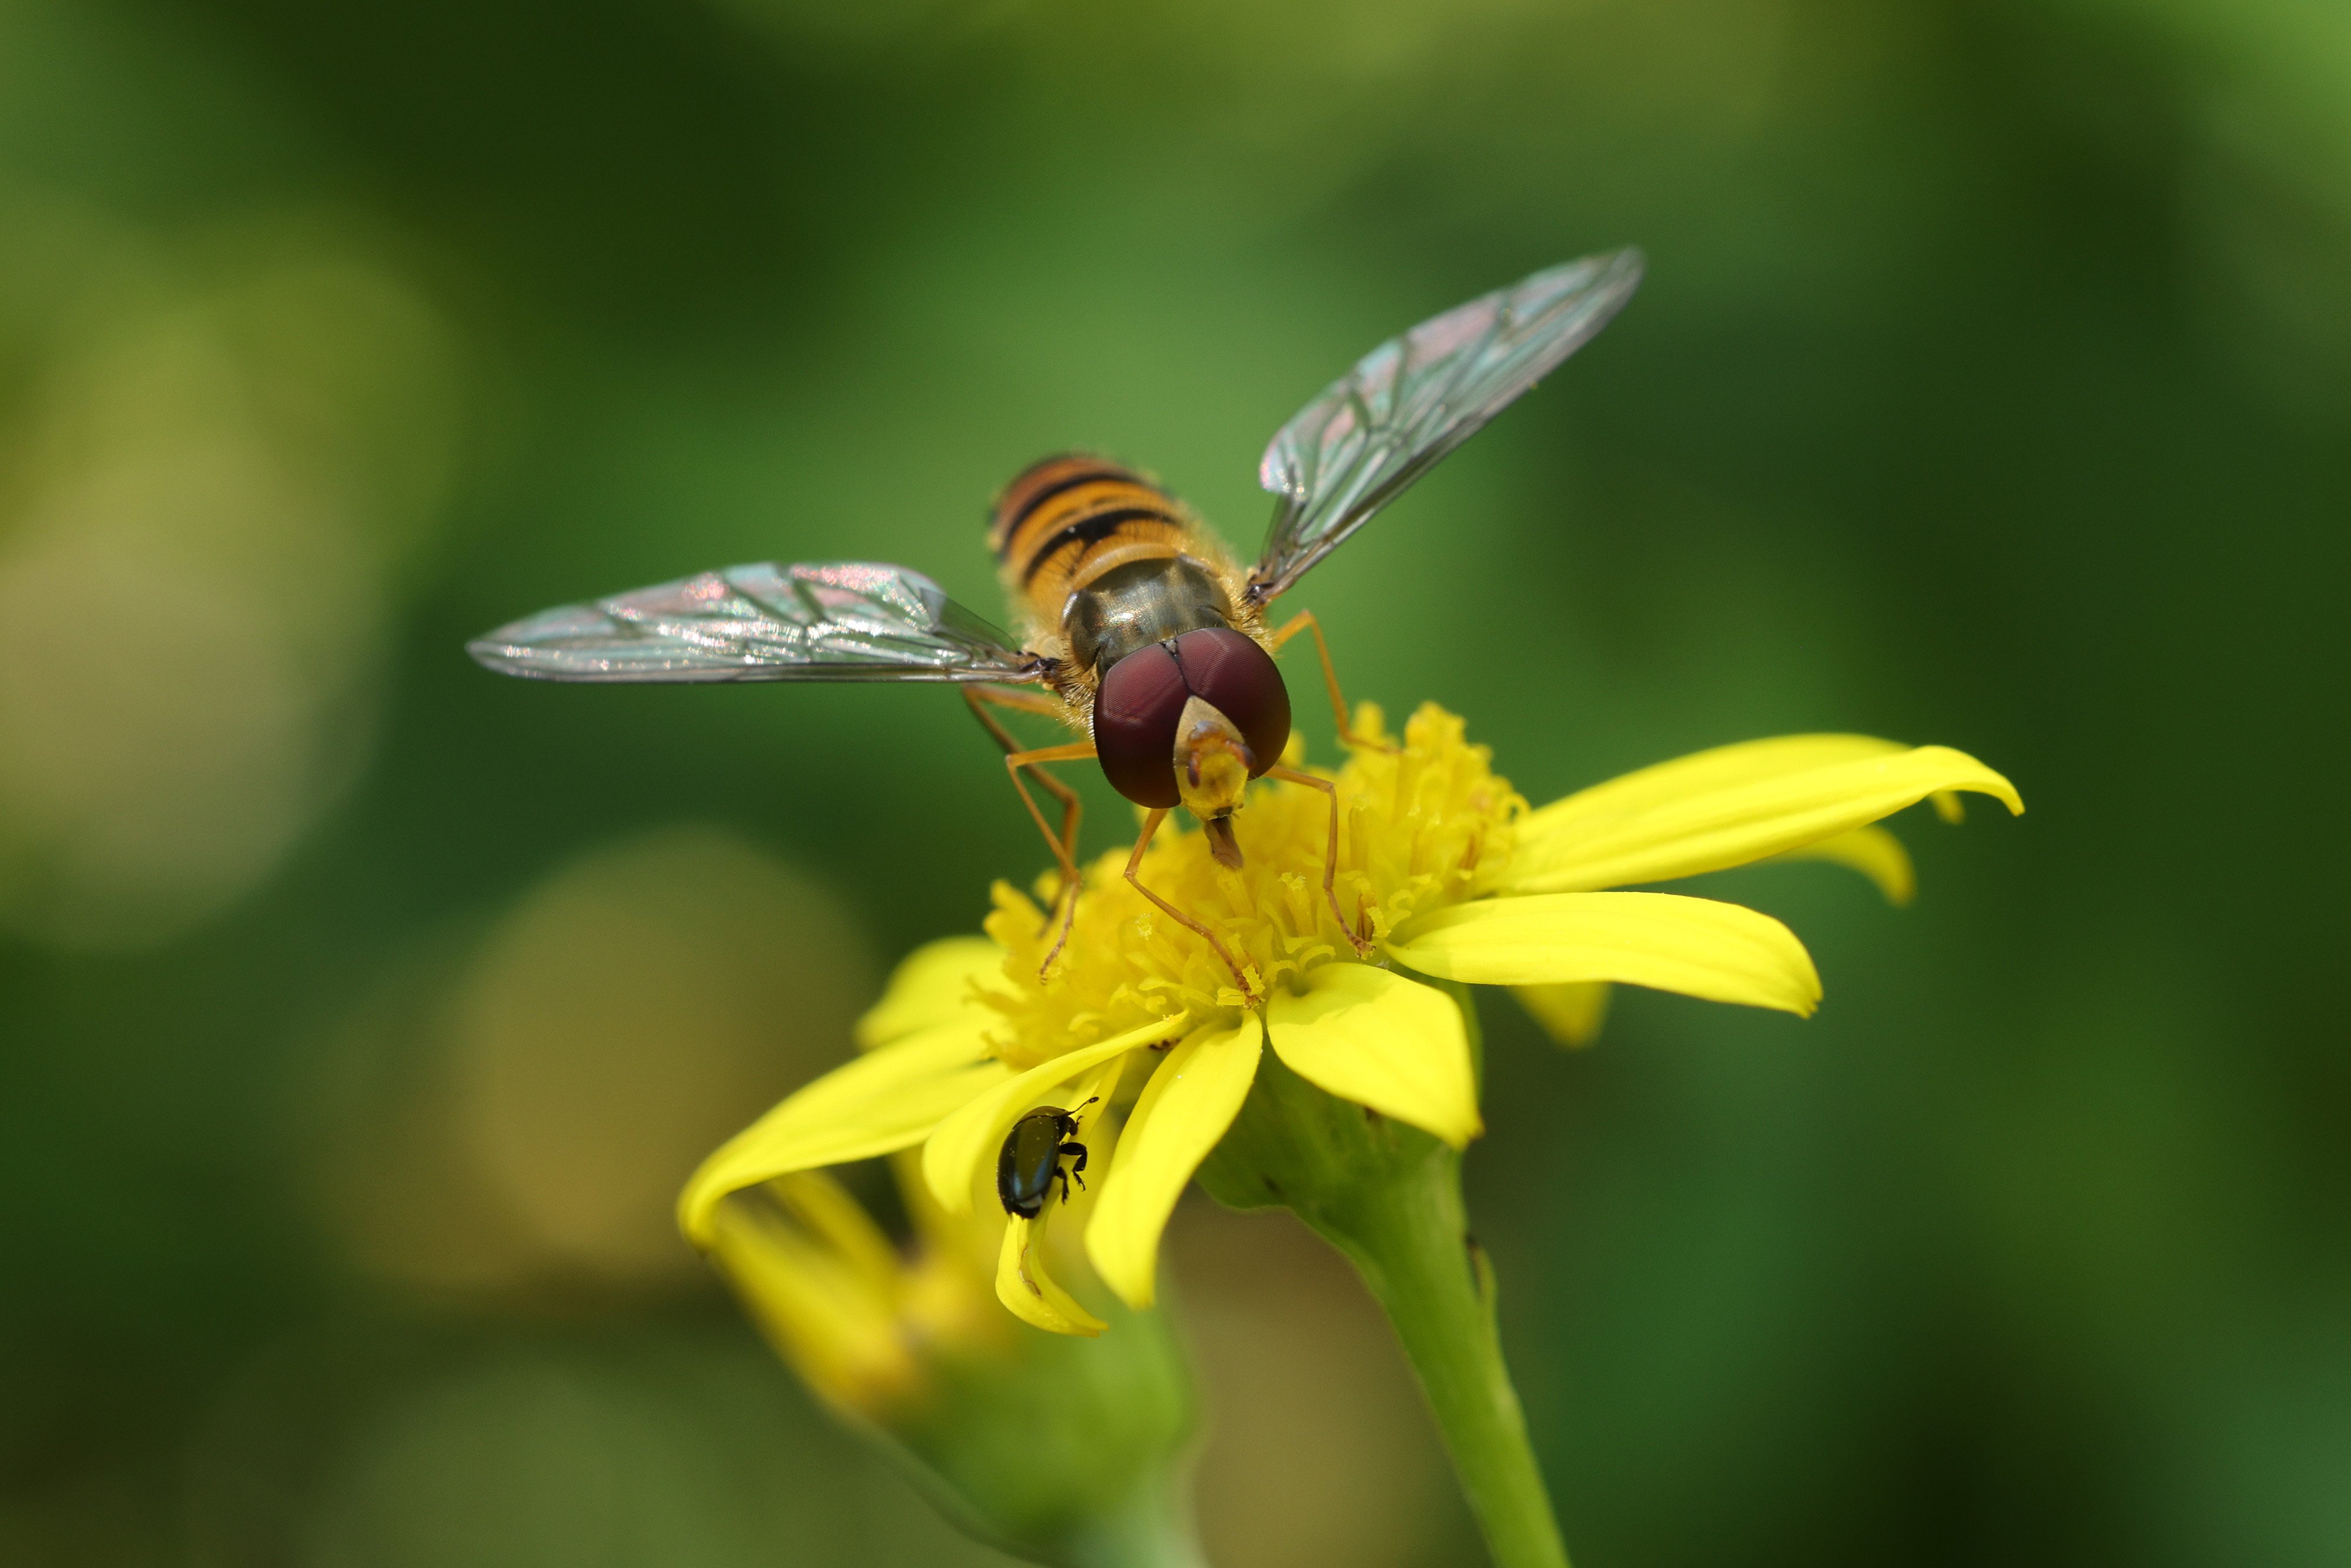 A little hoverfly